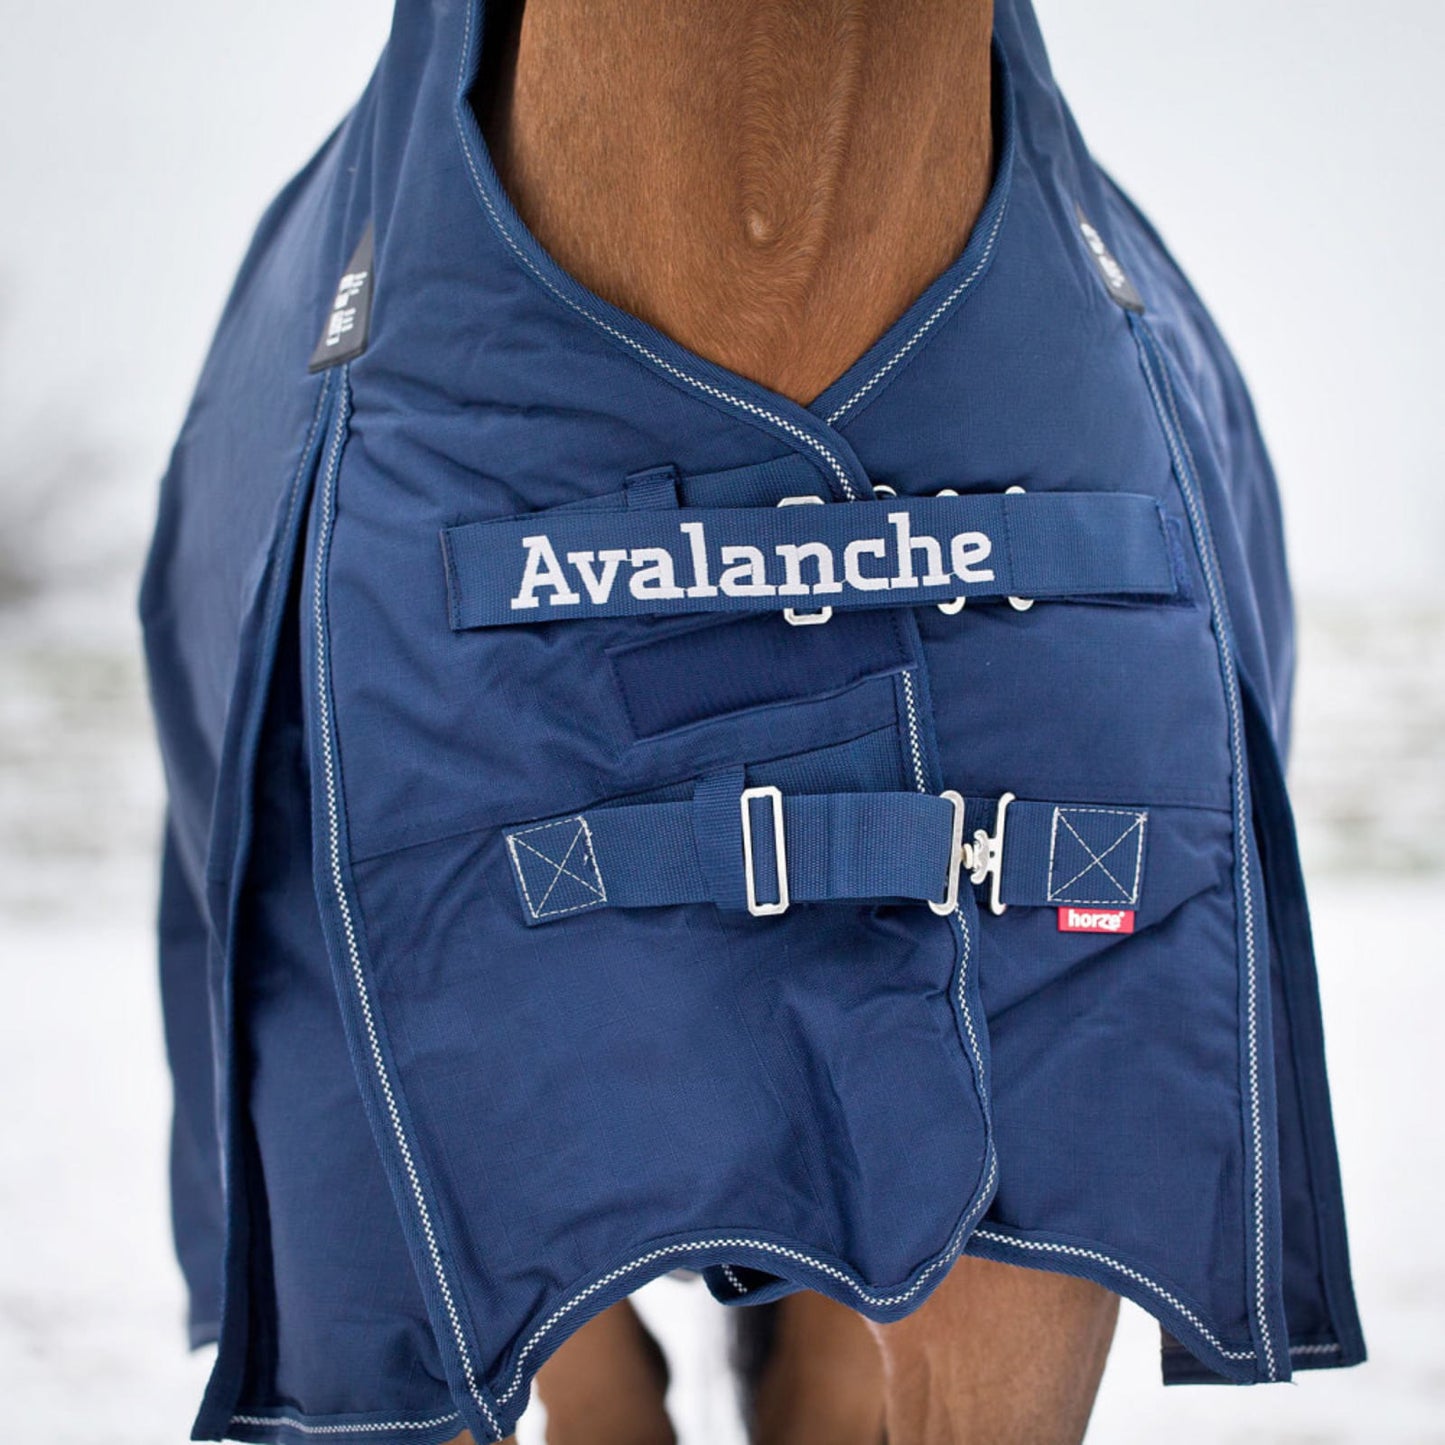 Avalanche Fleece Lined Turn Out Blanket